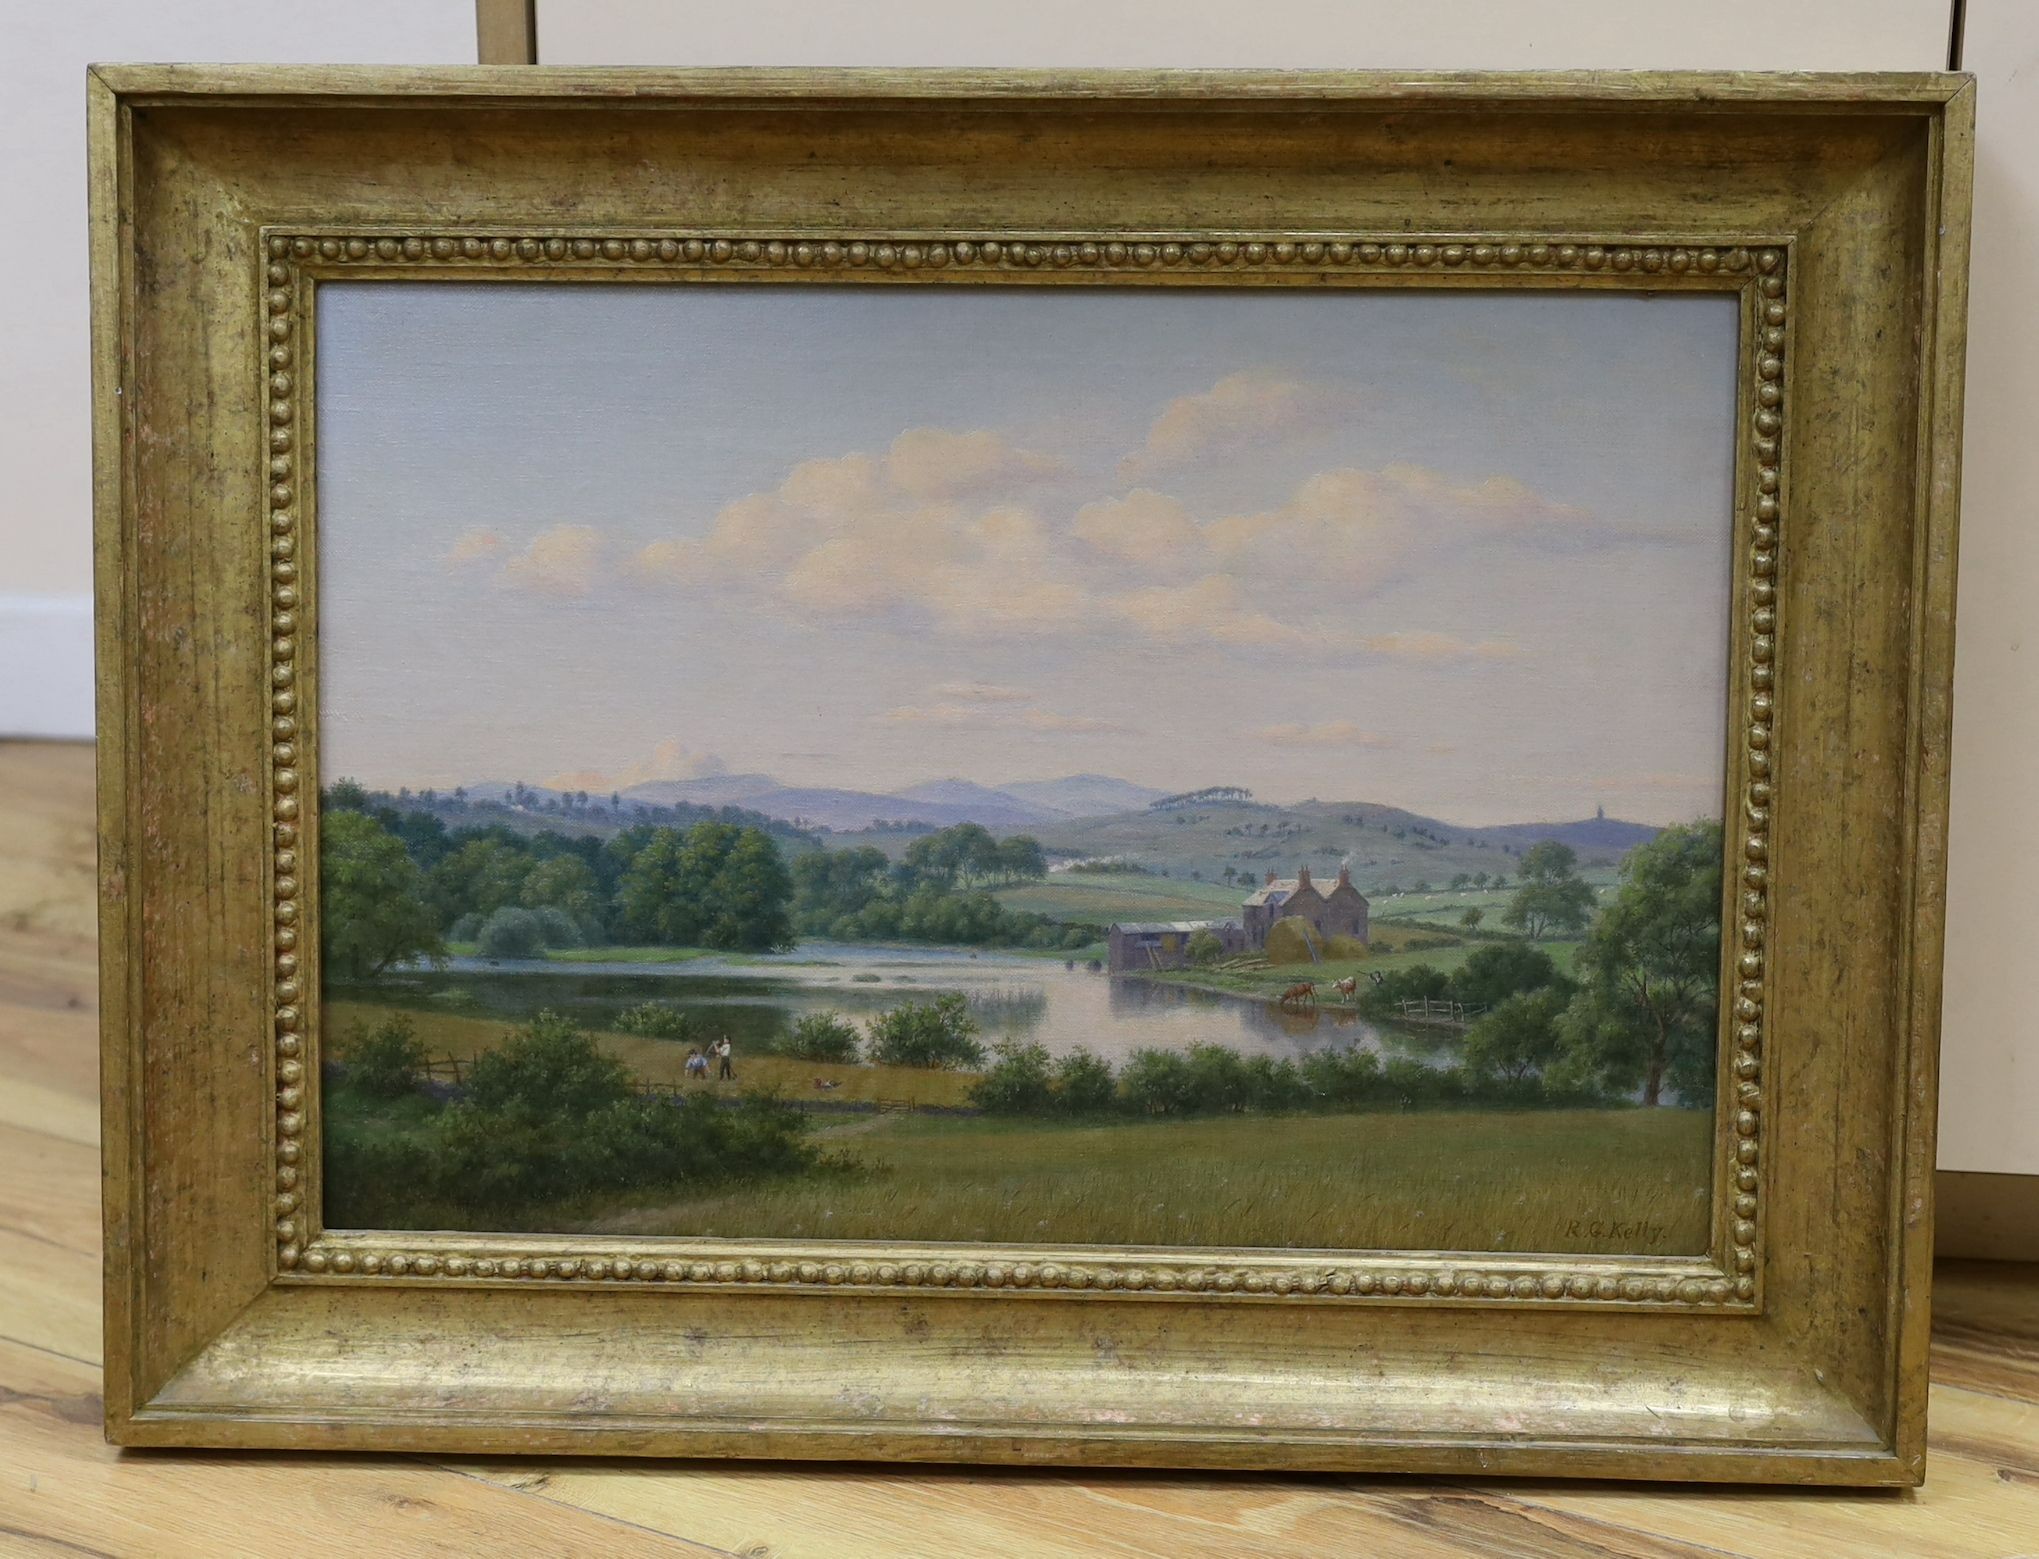 RG Kelly (20th C.), oil on canvas, Extensive landscape with harvesters and cattle watering, signed, 34 x 50cm